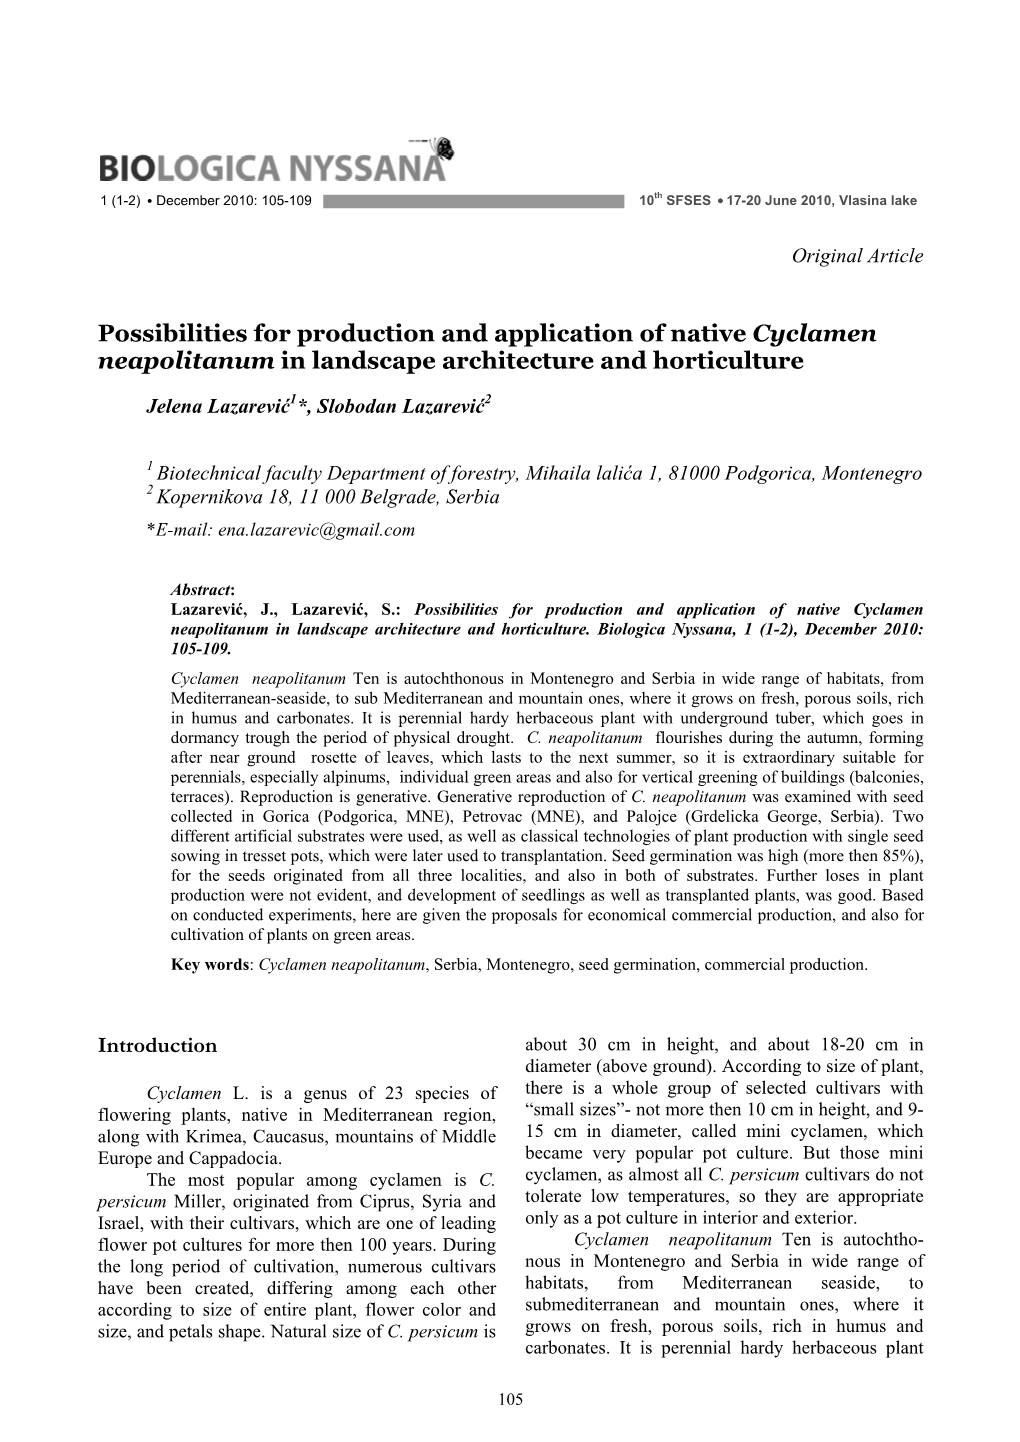 ! Possibilities for Production and Application of Native Cyclamen Neapolitanum in Landscape Architecture and Horticulture